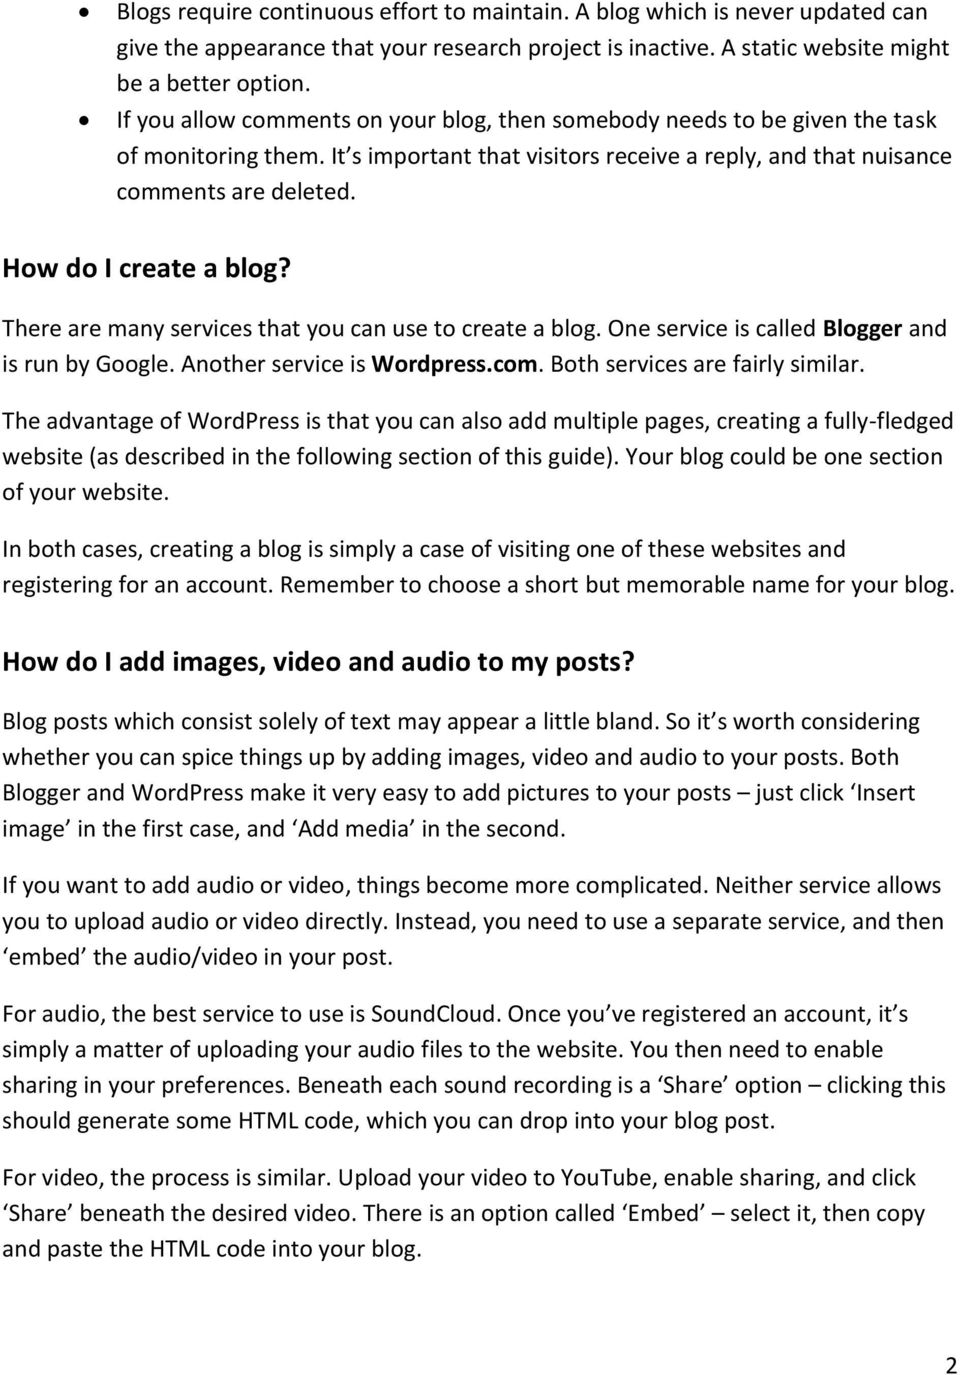 How do I create a blog? There are many services that you can use to create a blog. One service is called Blogger and is run by Google. Another service is Wordpress.com.